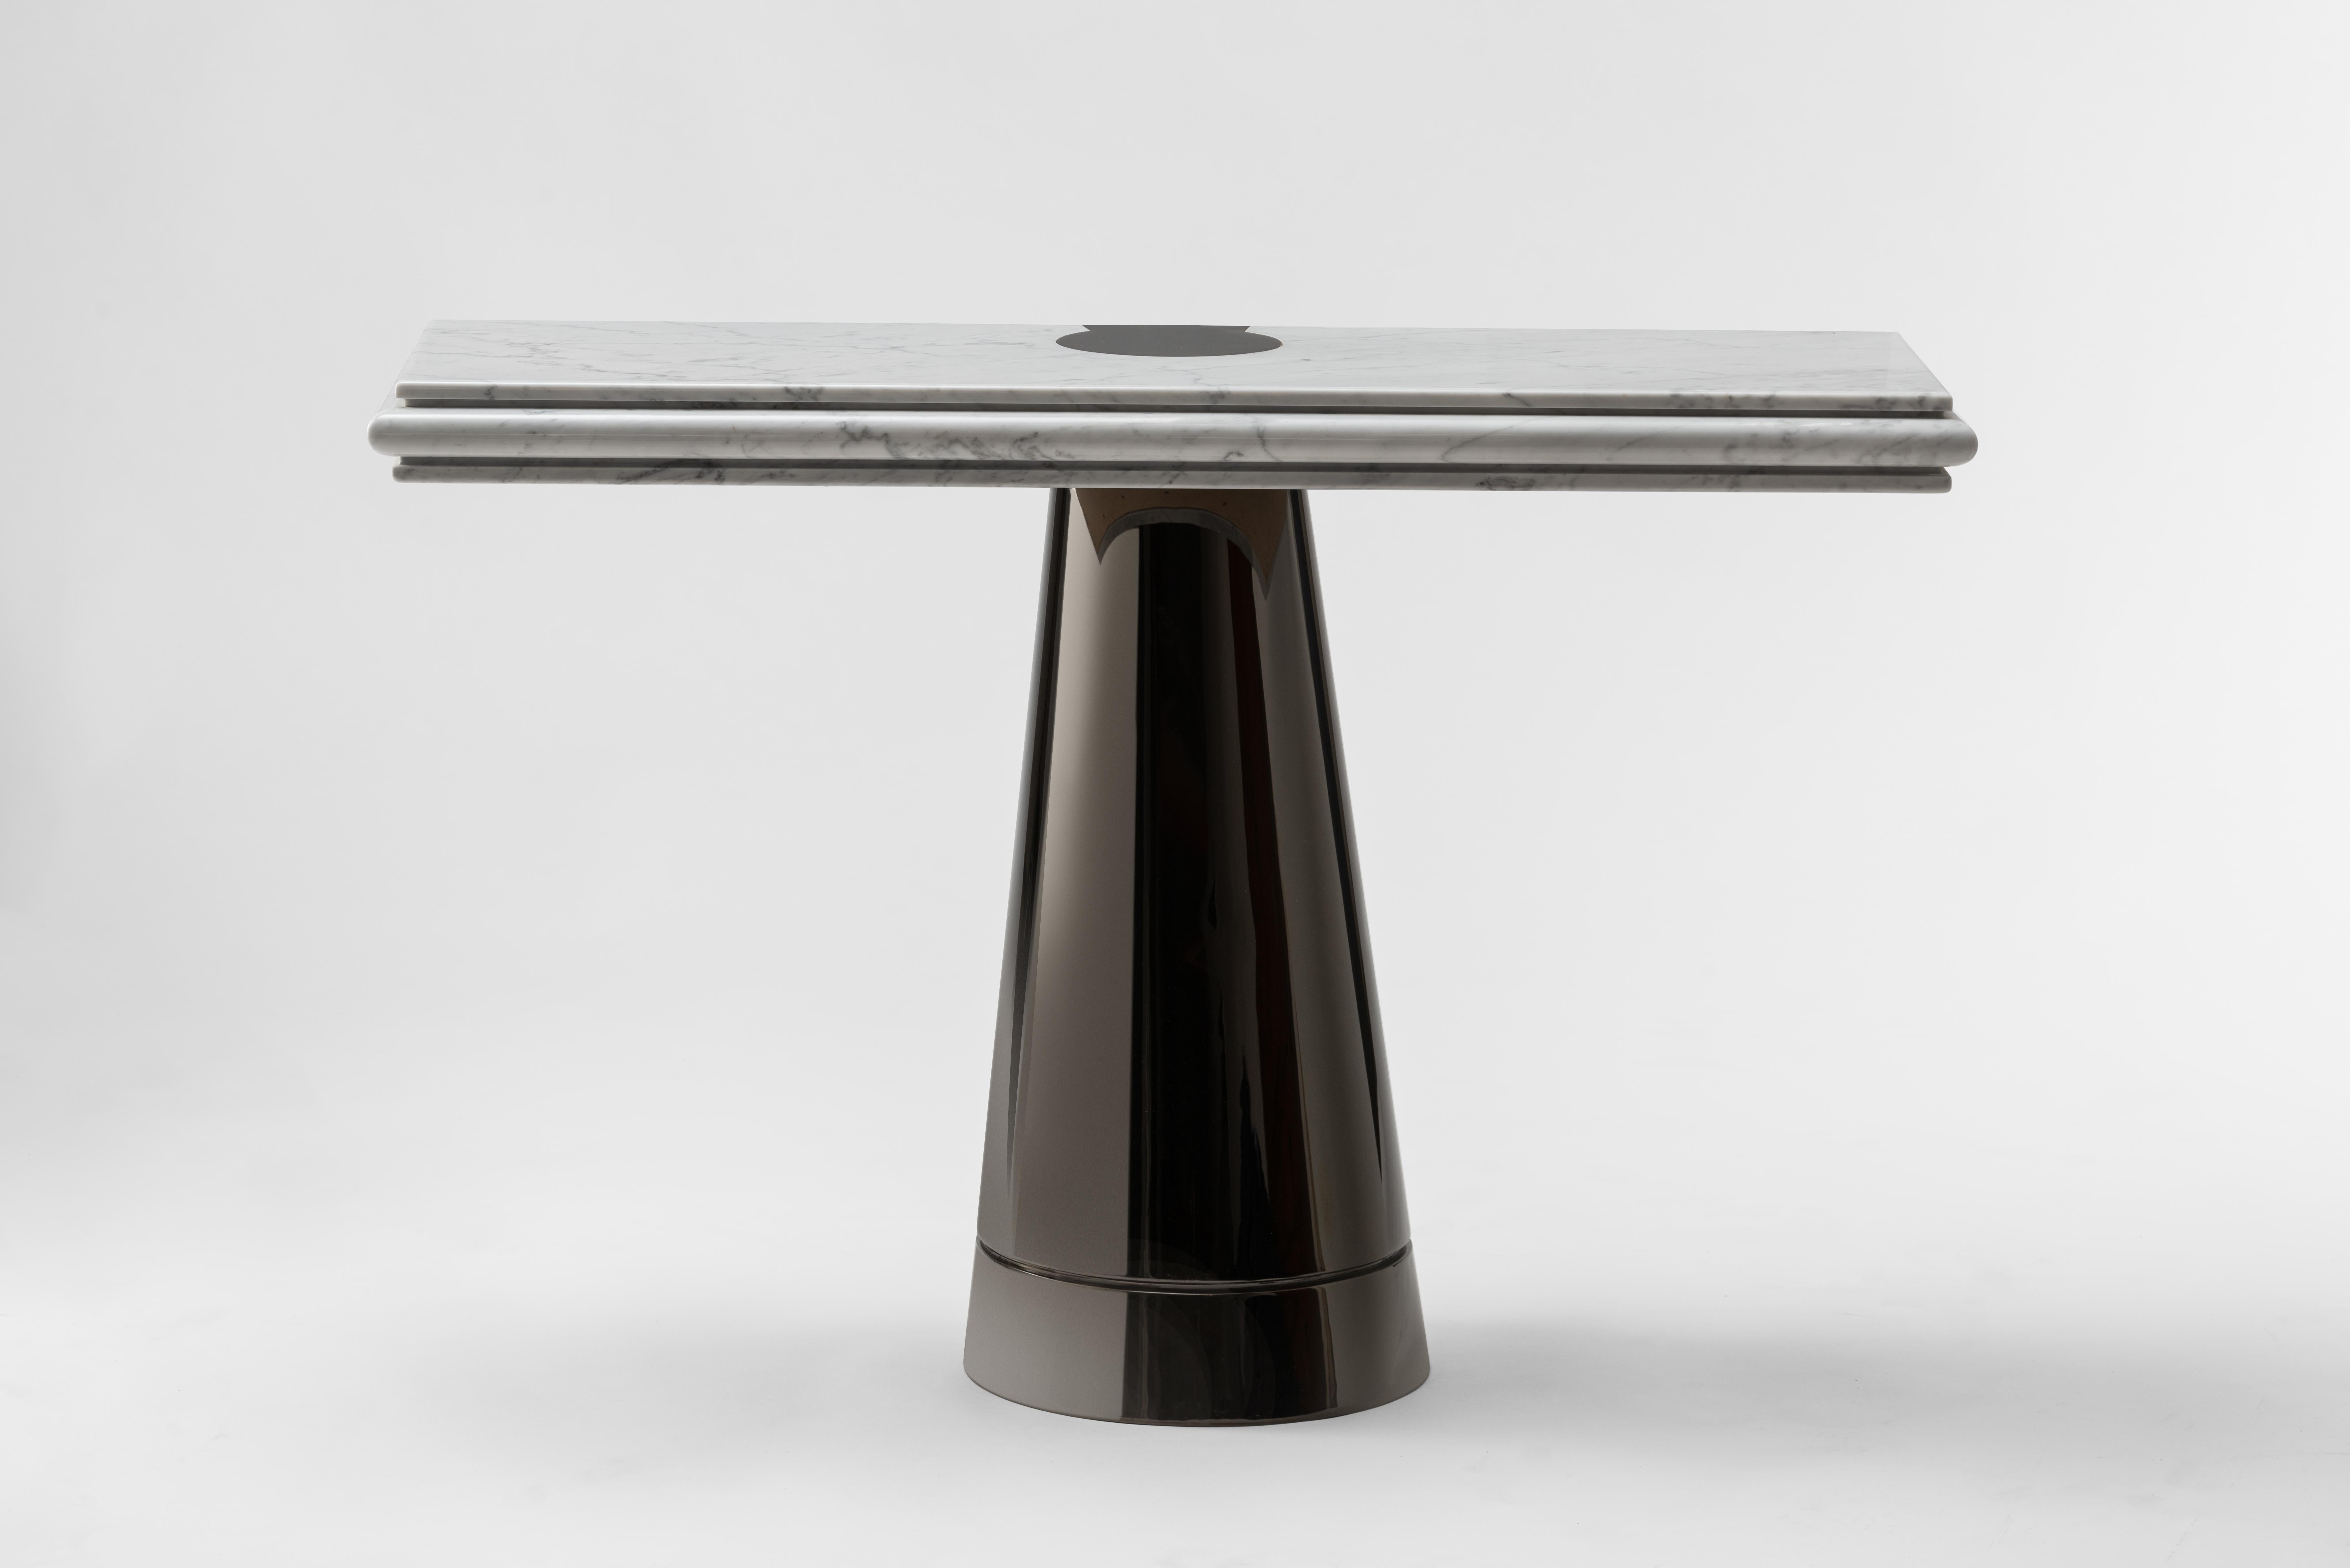 The Crocodile's Tear Side Table is a stunning piece of furniture that is both functional and poetic in its design. The metal base, finished in black polished chrome, flows through the marble tabletop like a teardrop, adding a touch of artistry and